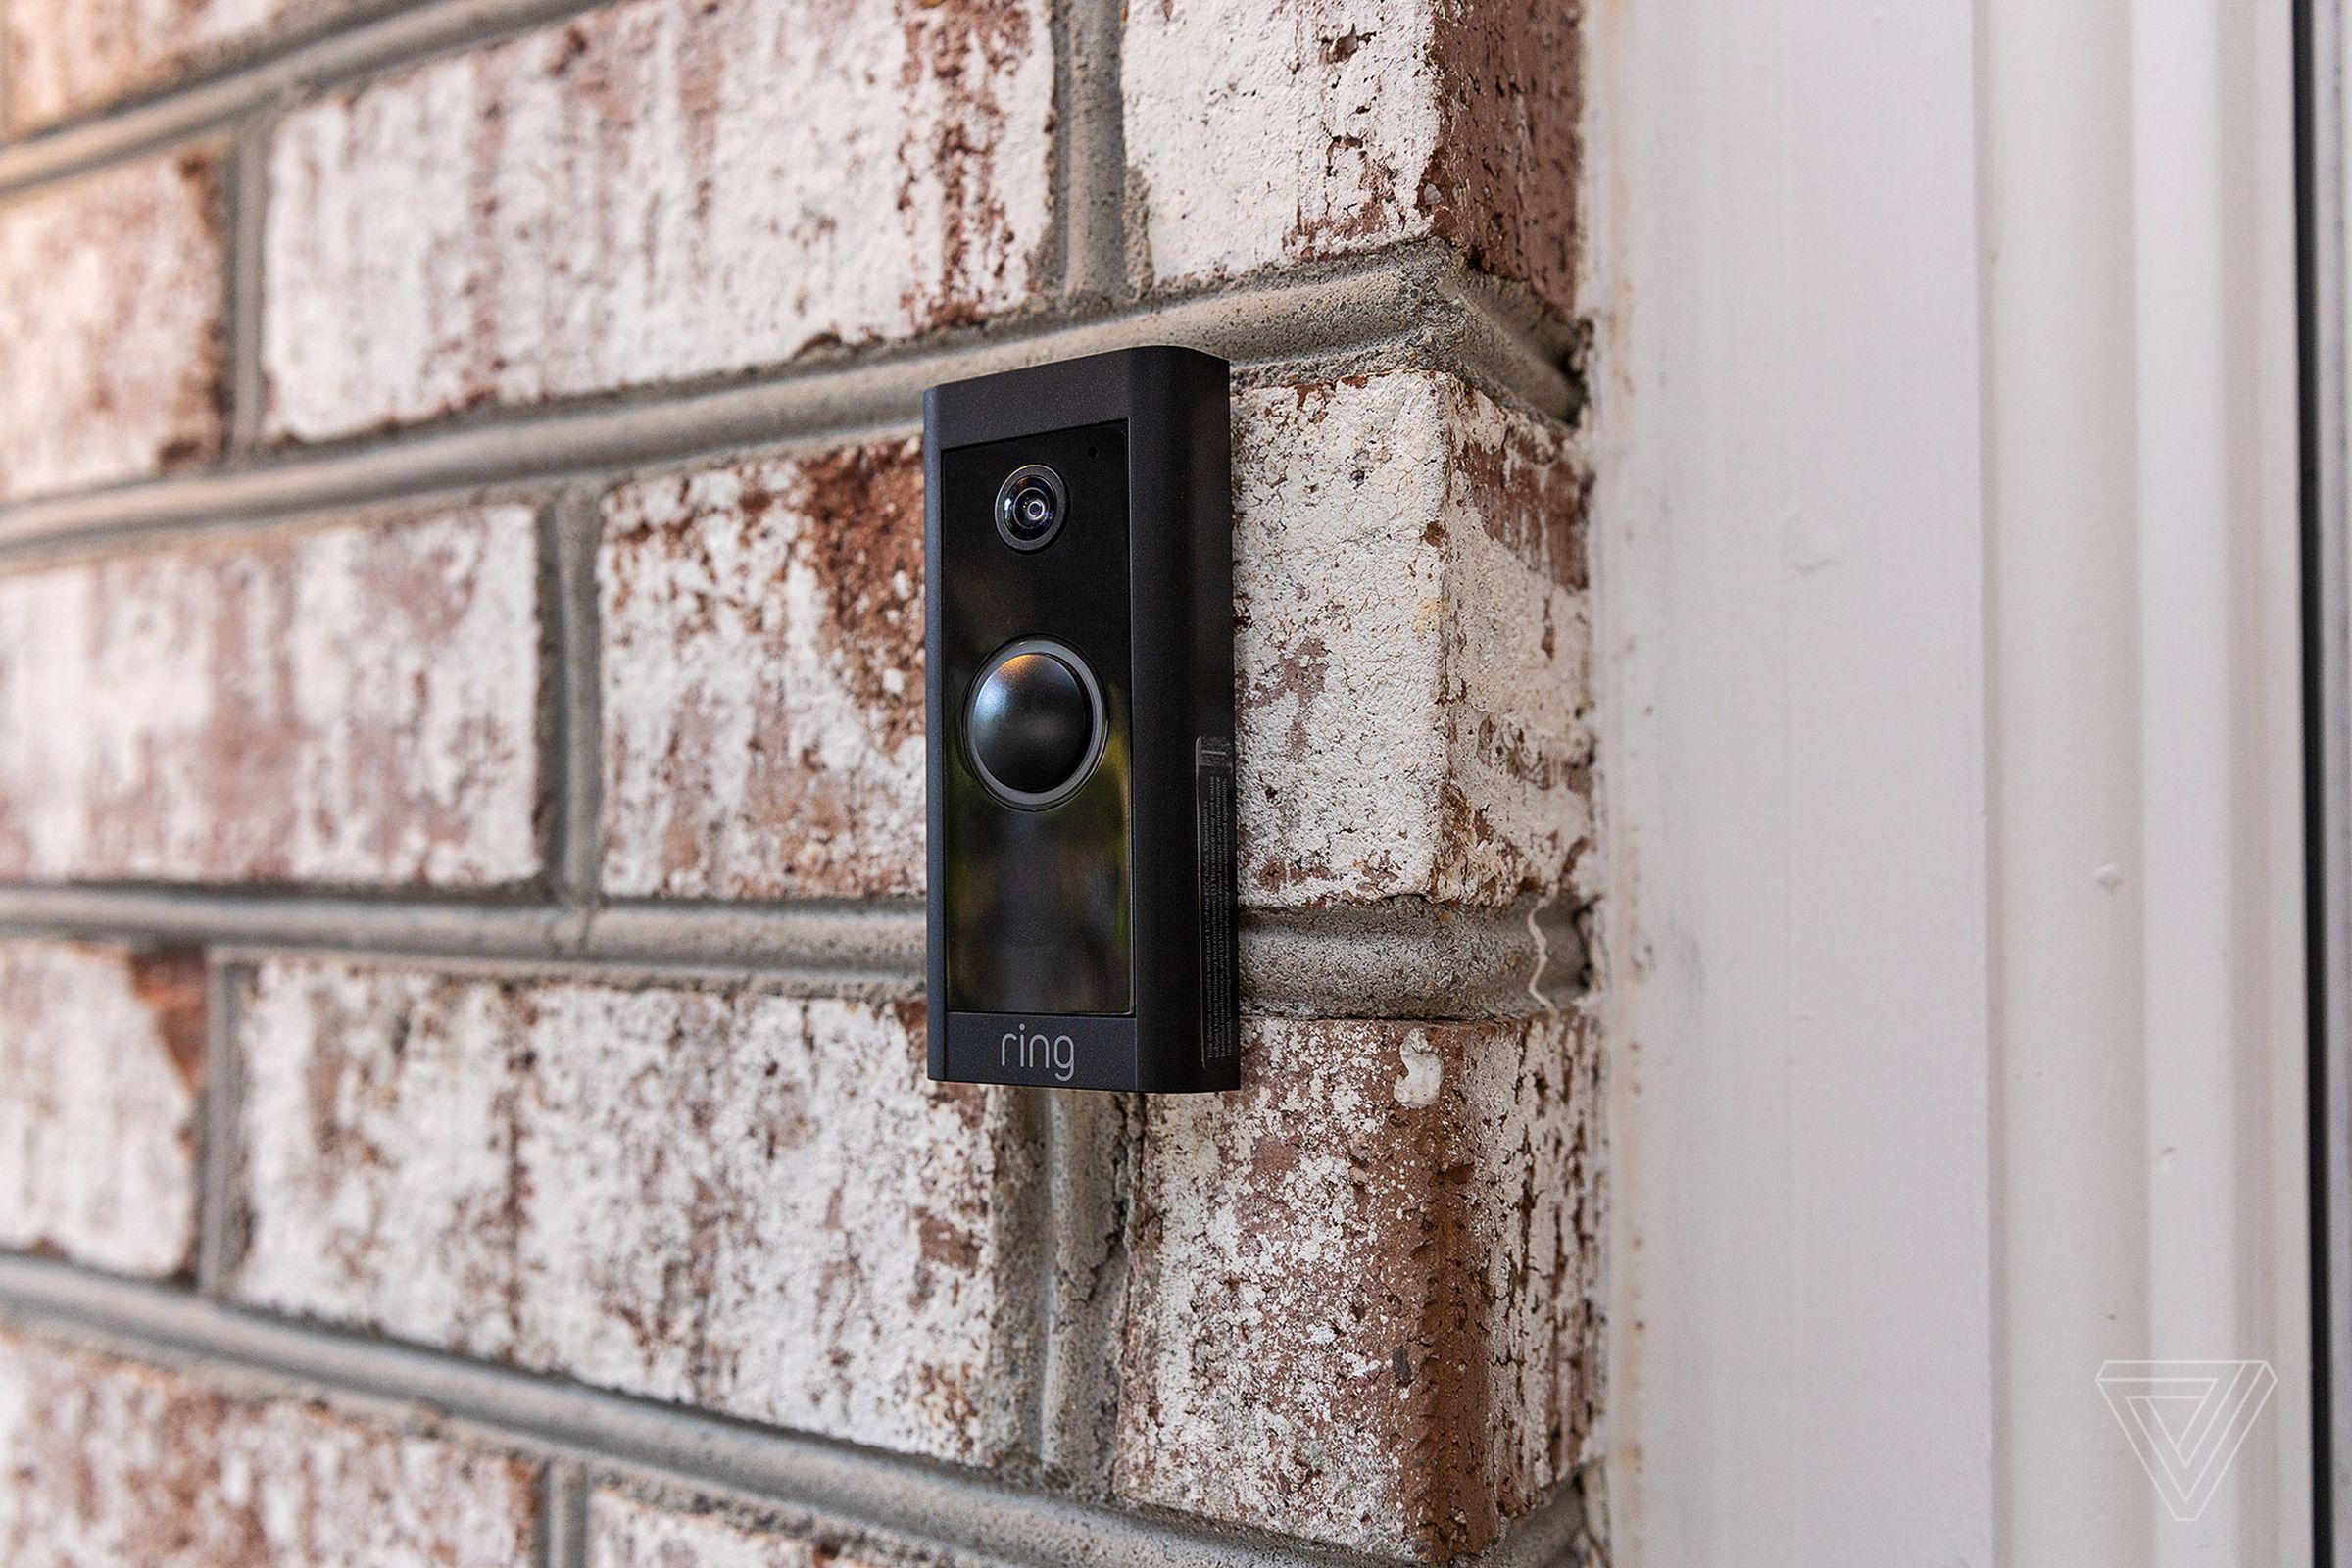 Alexa can now make an announcement when your Ring security cameras and doorbell cameras see a person. Integration with cameras from Google Nest and Abode is coming soon.